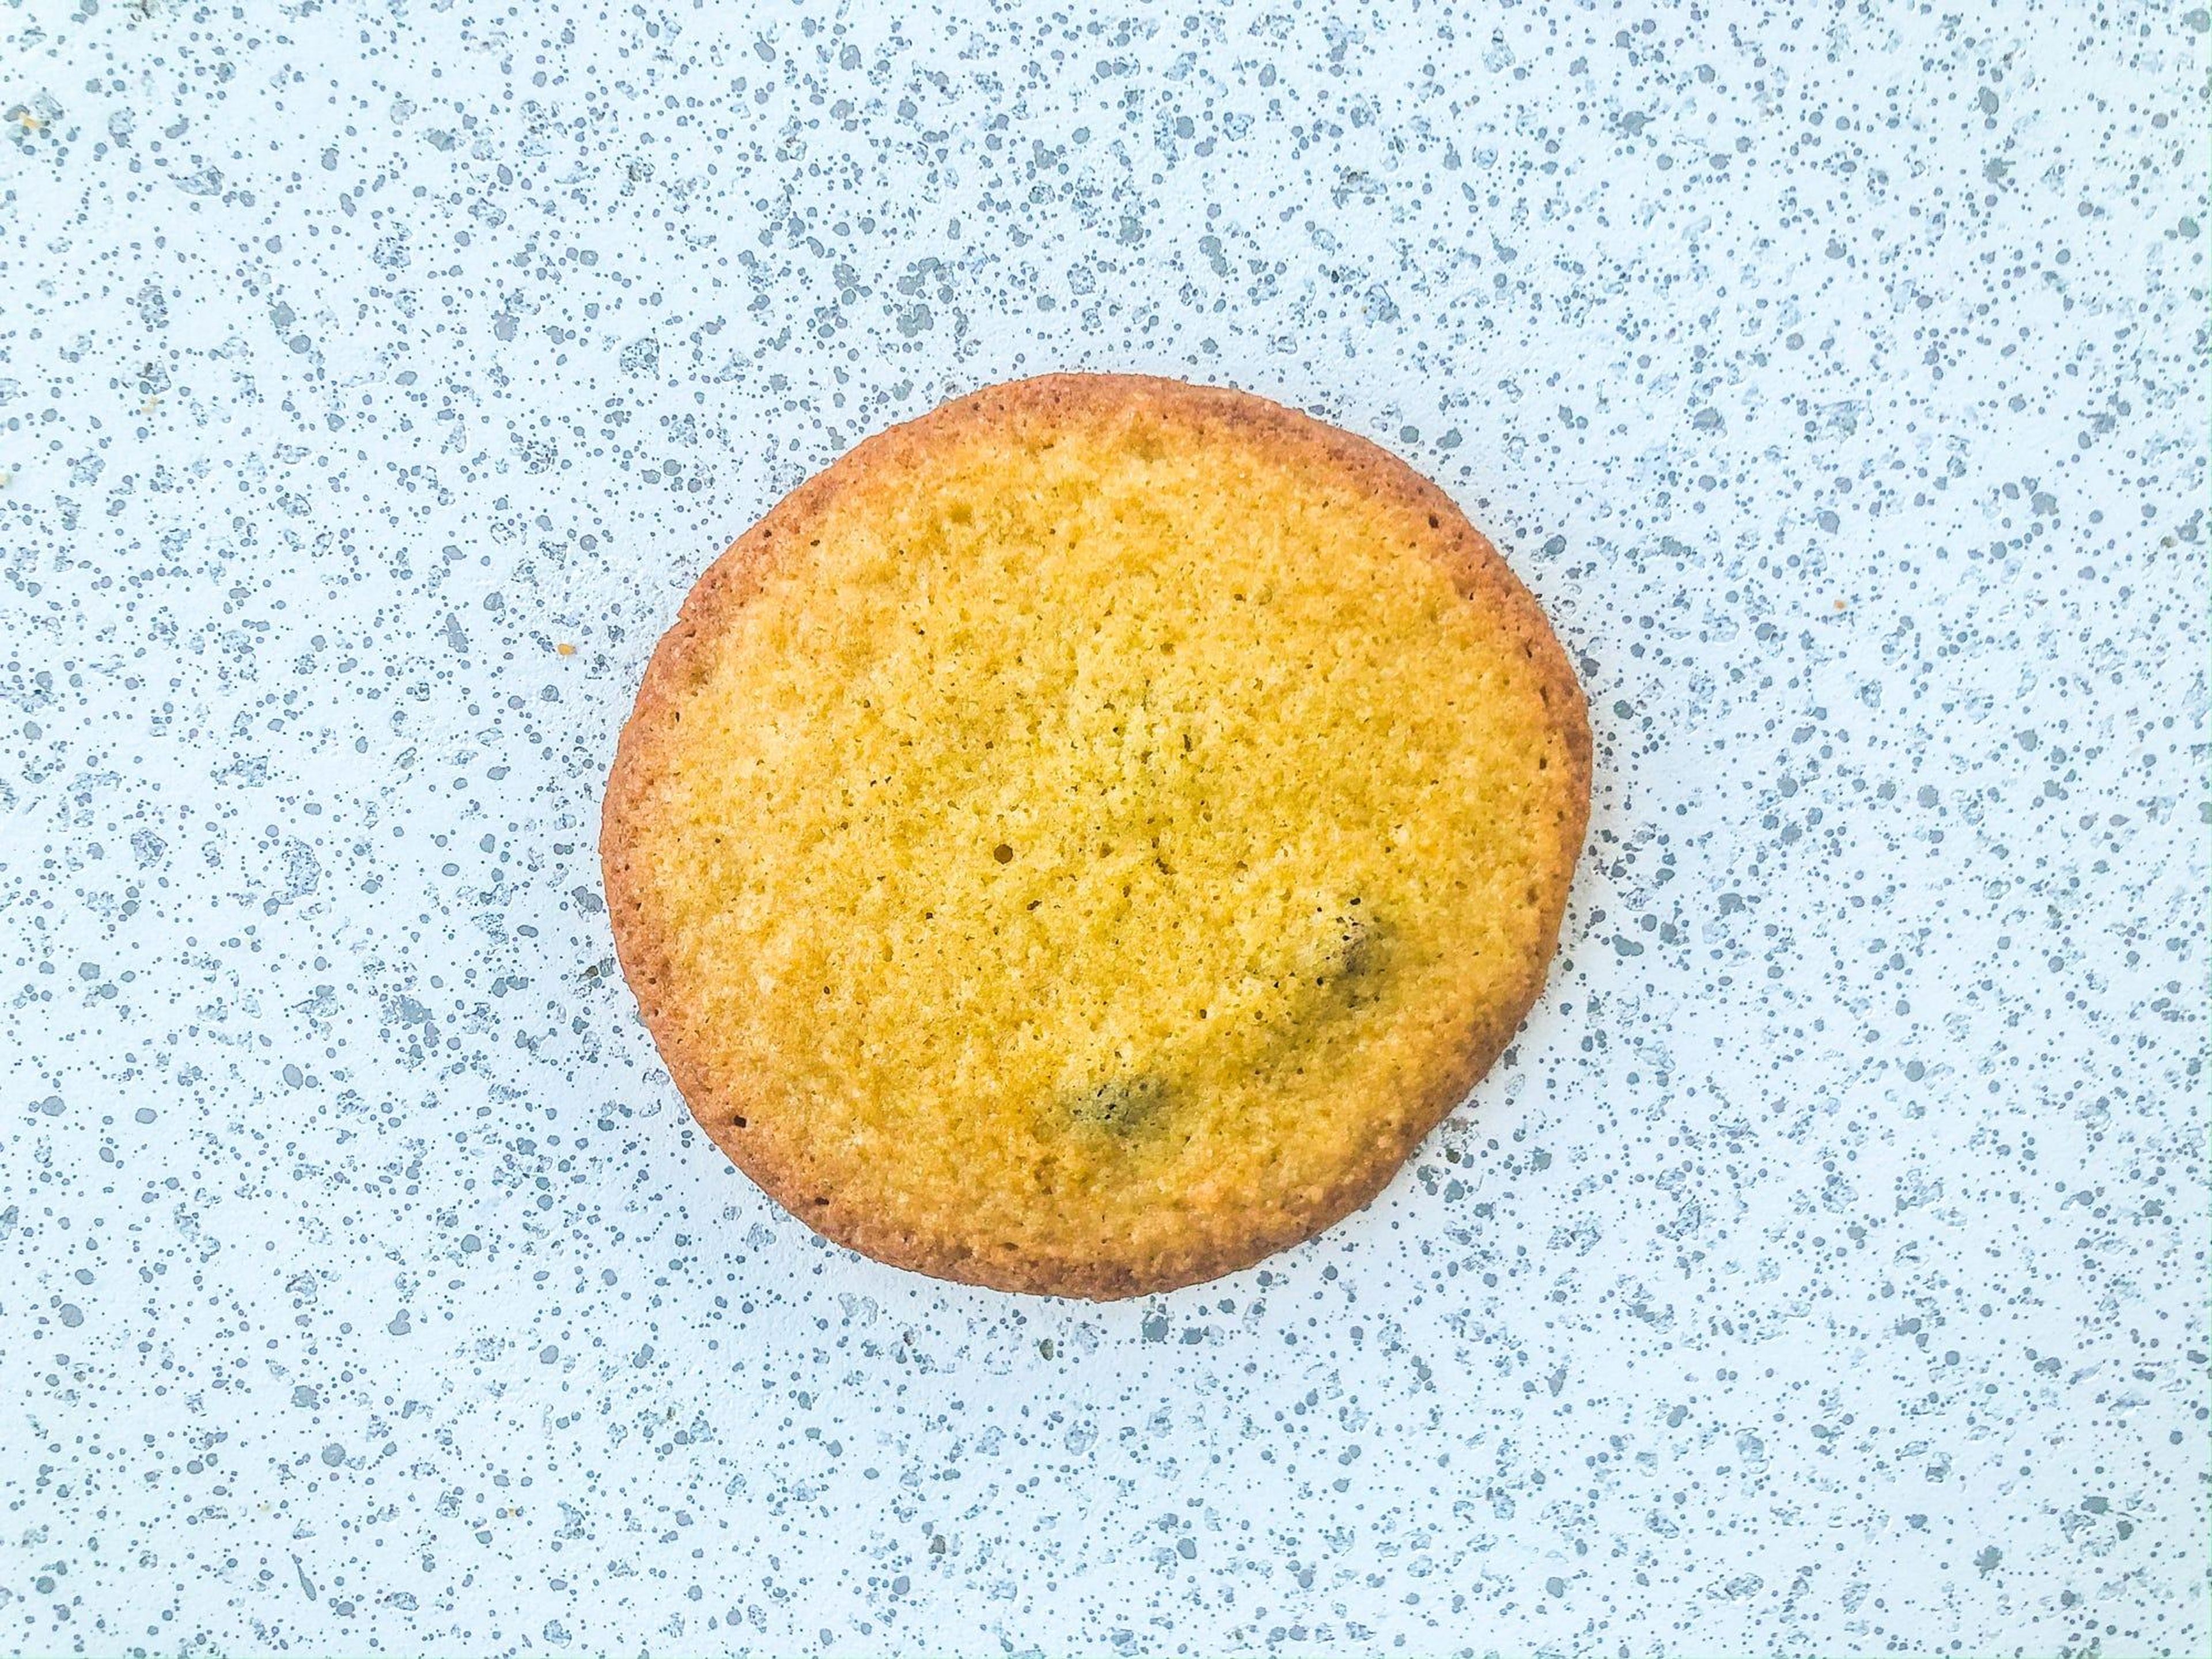 A cookie with baking powder.